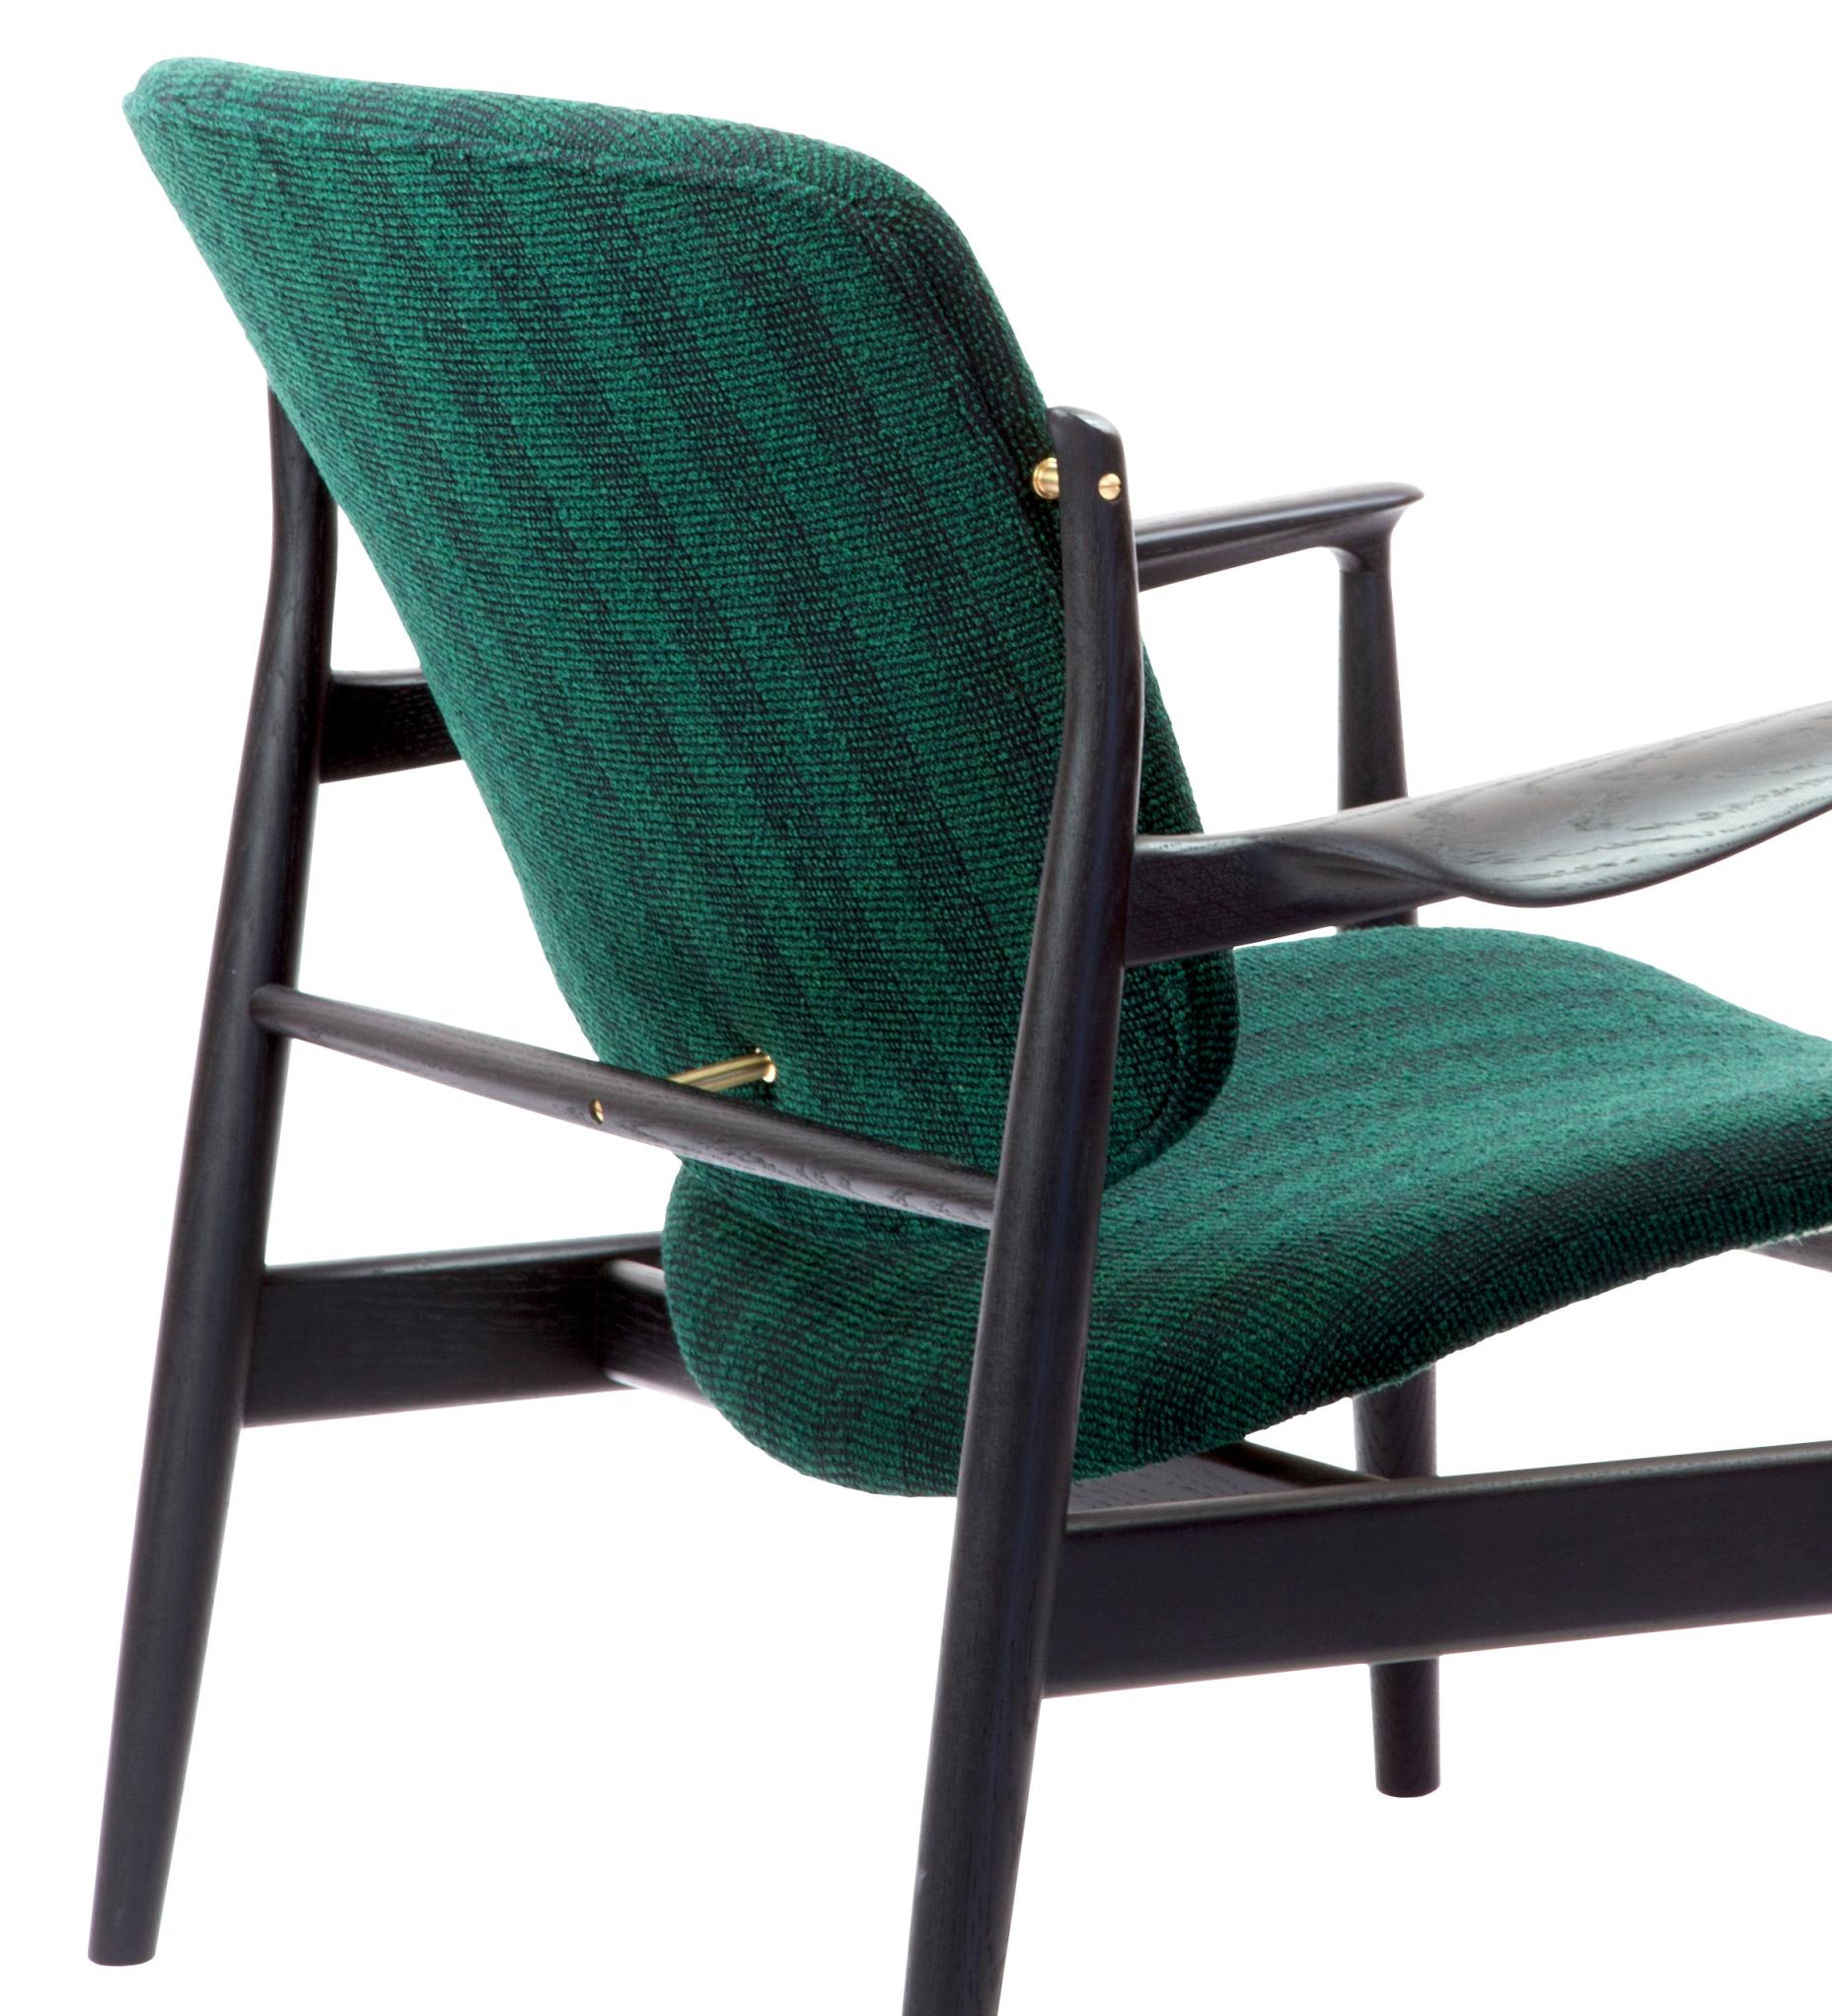 Armchair designed by Finn Juhl in 1956, relaunched in 20016.
Manufactured by House of Finn Juhl in Denmark.

Finn Juhl rode a wave of international success during the 1950s - in part thanks to his partnership with the Danish furniture